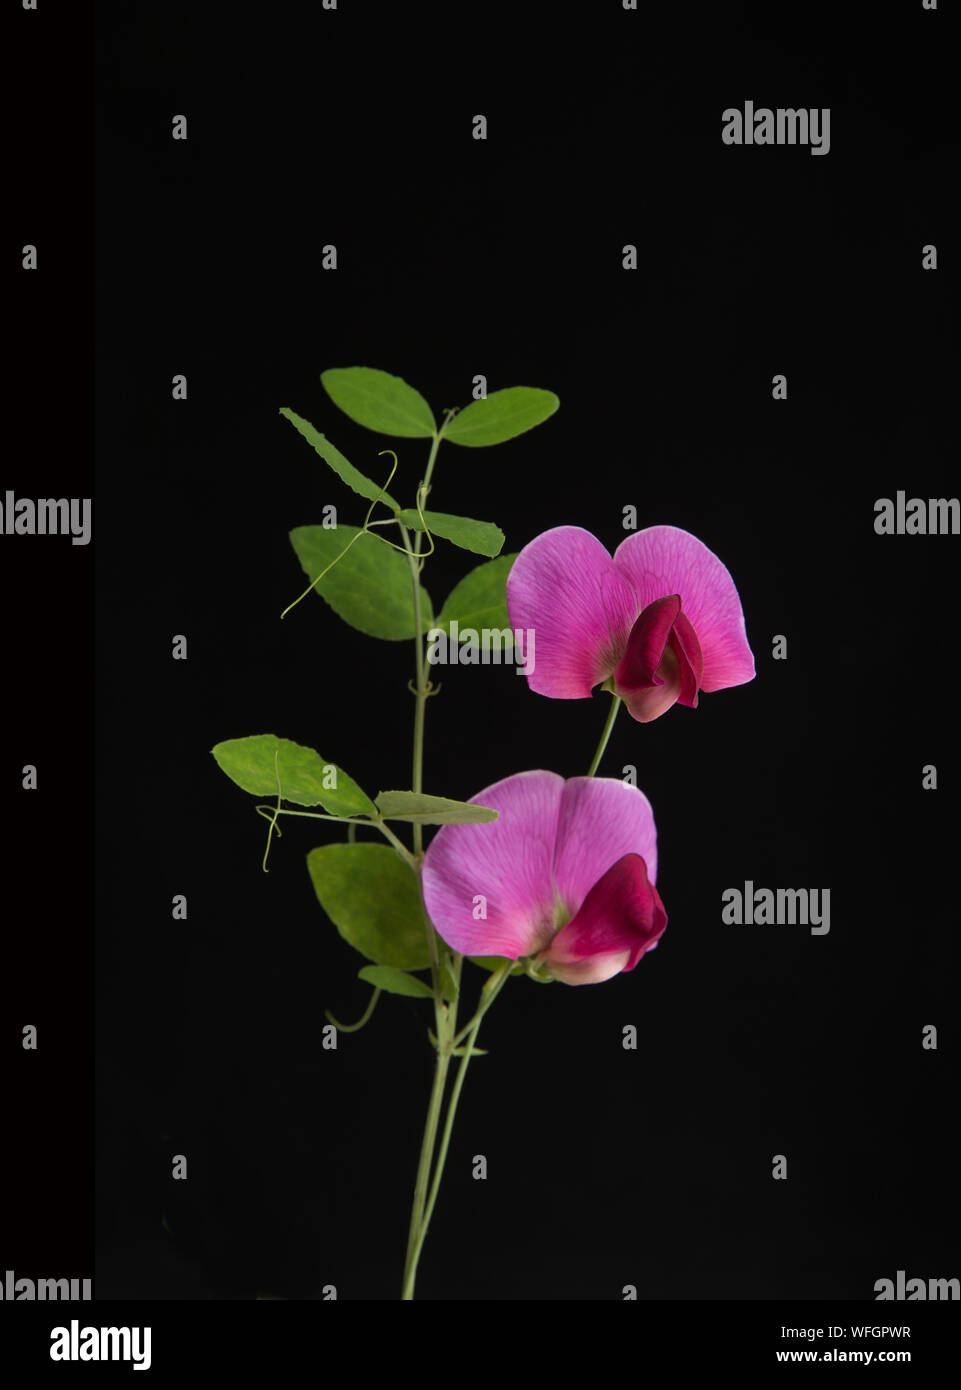 Perennial Sweet Pea flowers set against a black background Stock Photo